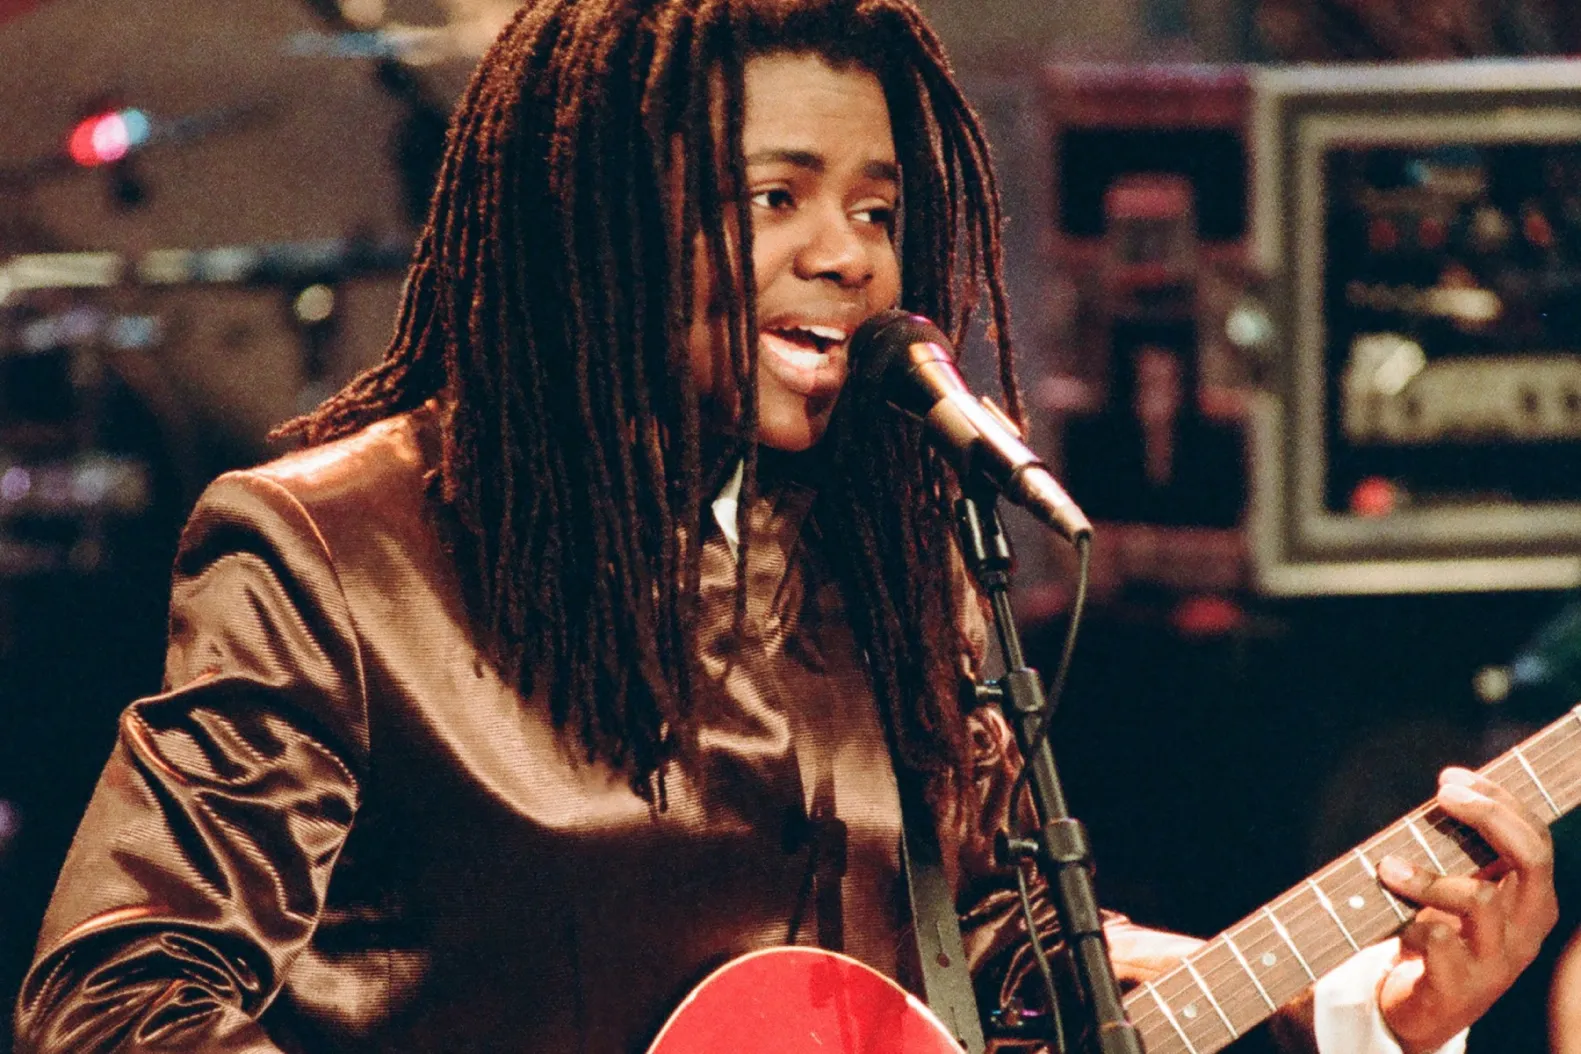 Tracy Chapman Just Became the First Black Songwriter to Win the CMA Song of the Year 